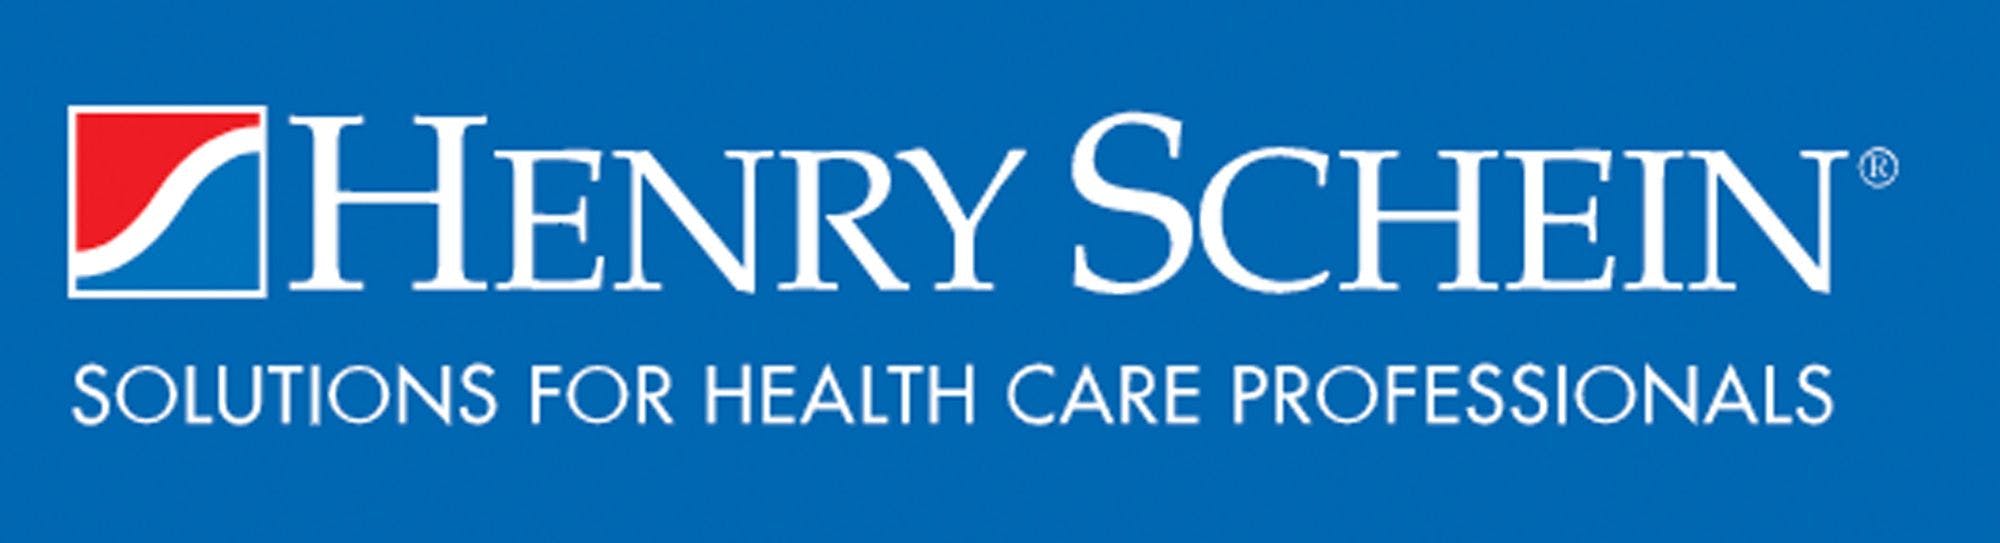 Henry Schein Announces 2022 Webinar Series on Breaking Down Barriers to Care